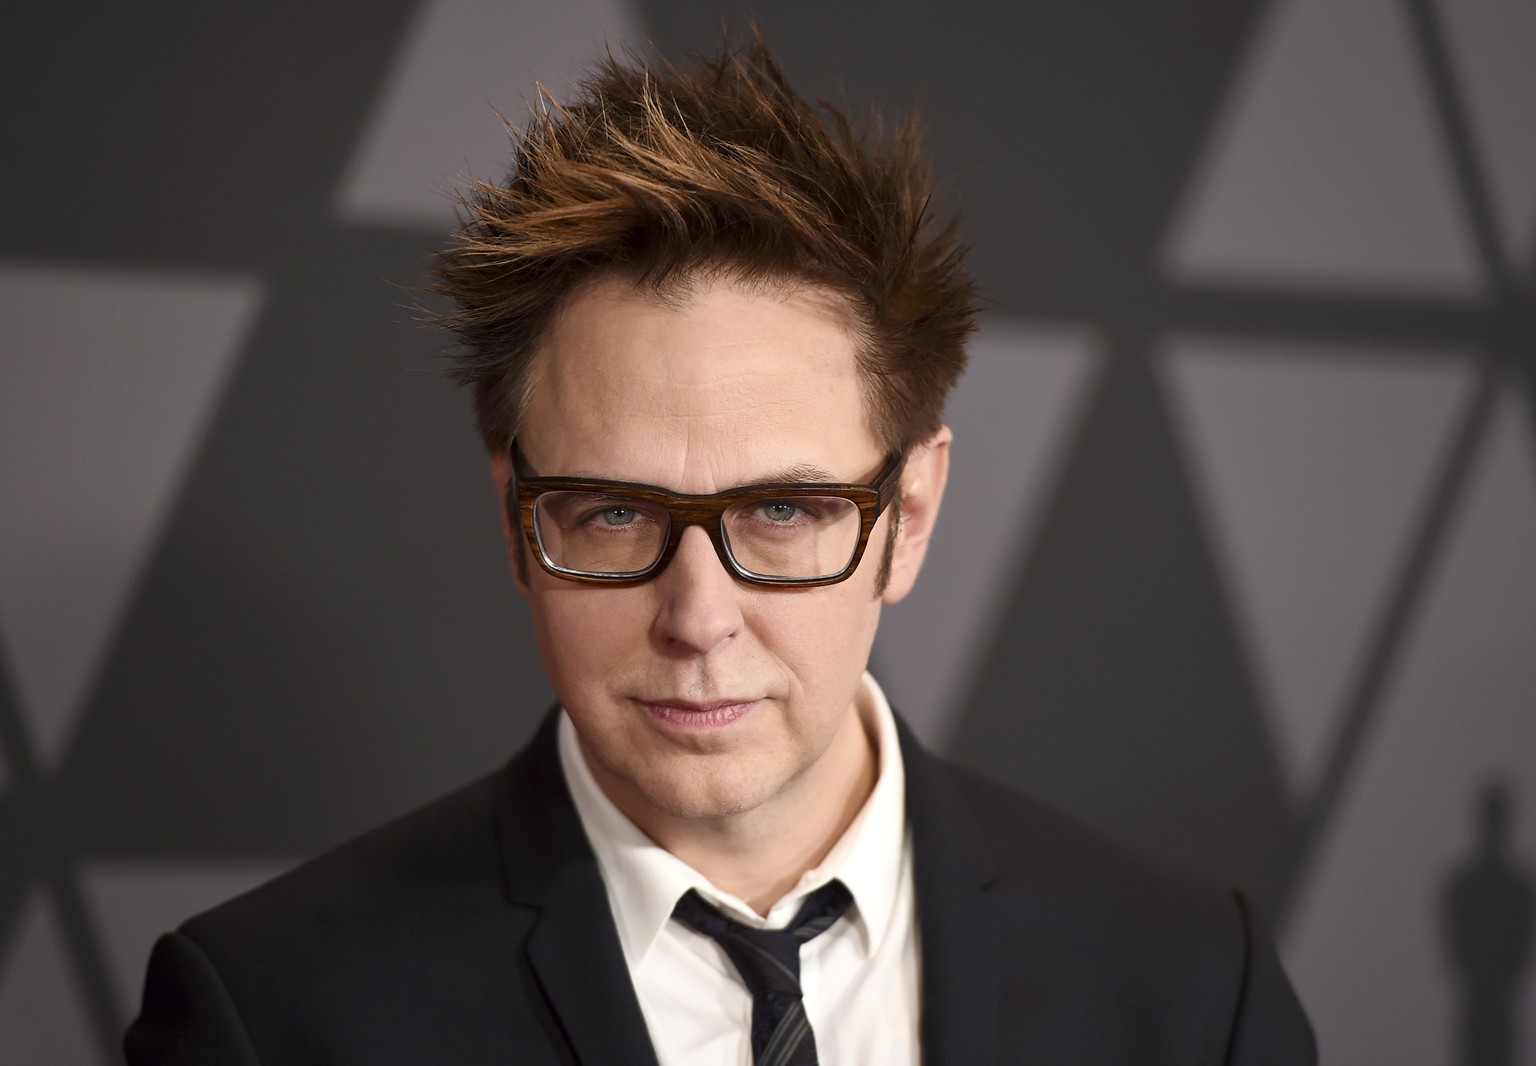 FILE - In this Nov. 11, 2017 file photo, filmmaker James Gunn arrives at the 9th annual Governors Awards in Los Angeles. Gunn has been fired as director of “Guardians of the Galaxy 3” because of old t ...